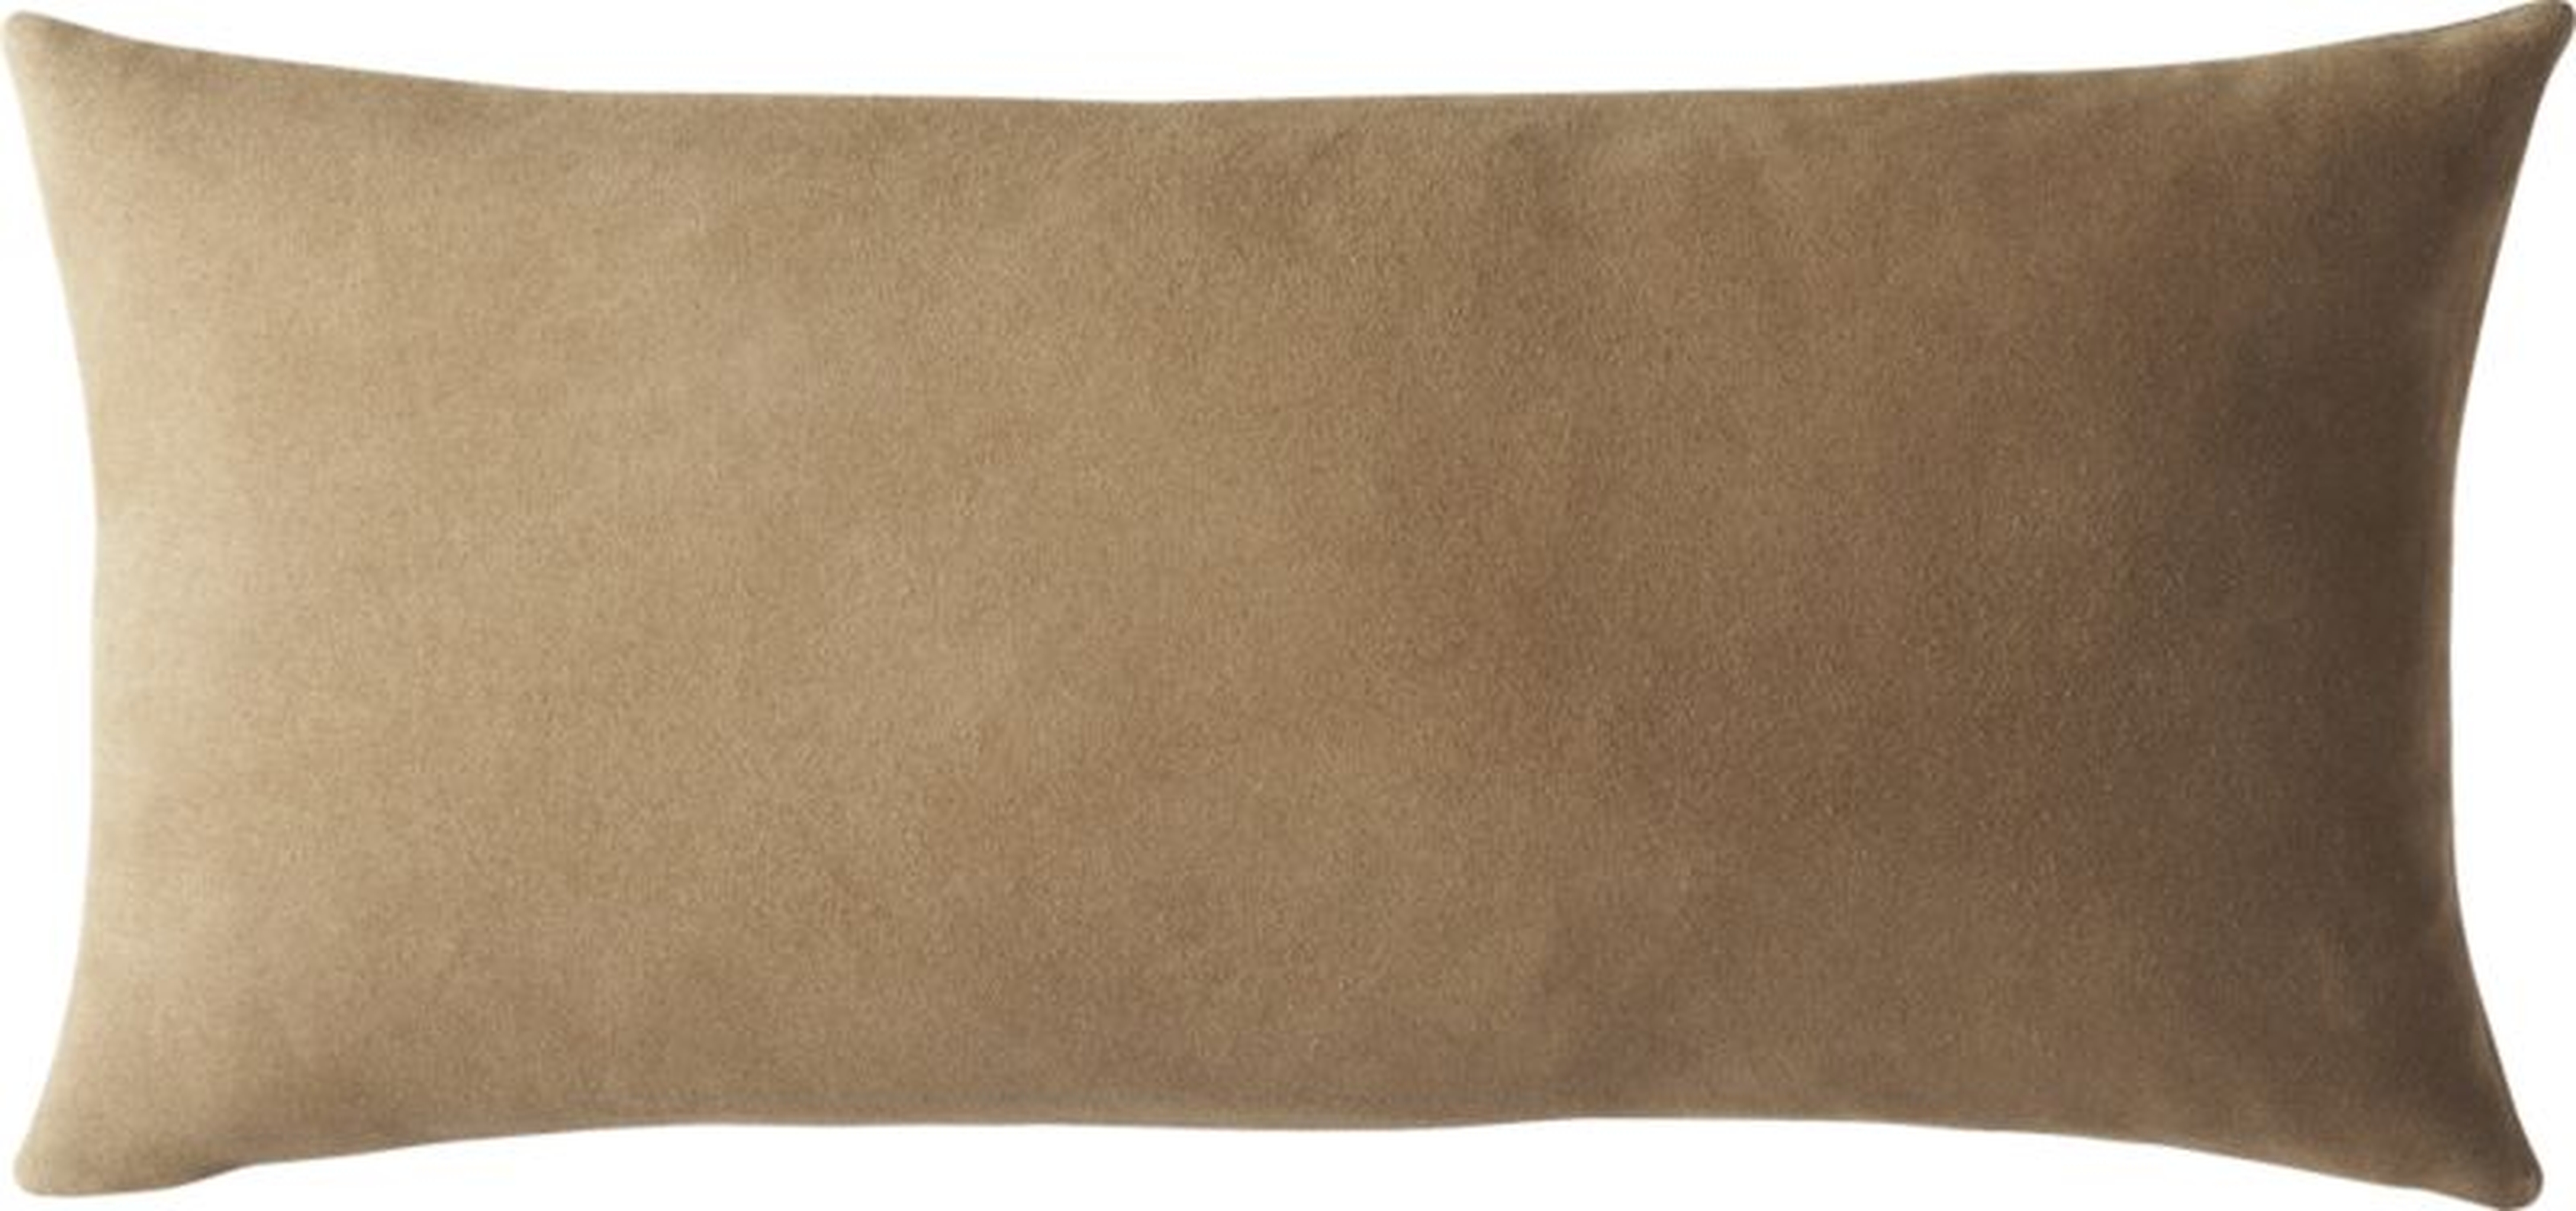 Suede Camel Tan Pillow with Feather-Down Insert, 23" x 11" - CB2